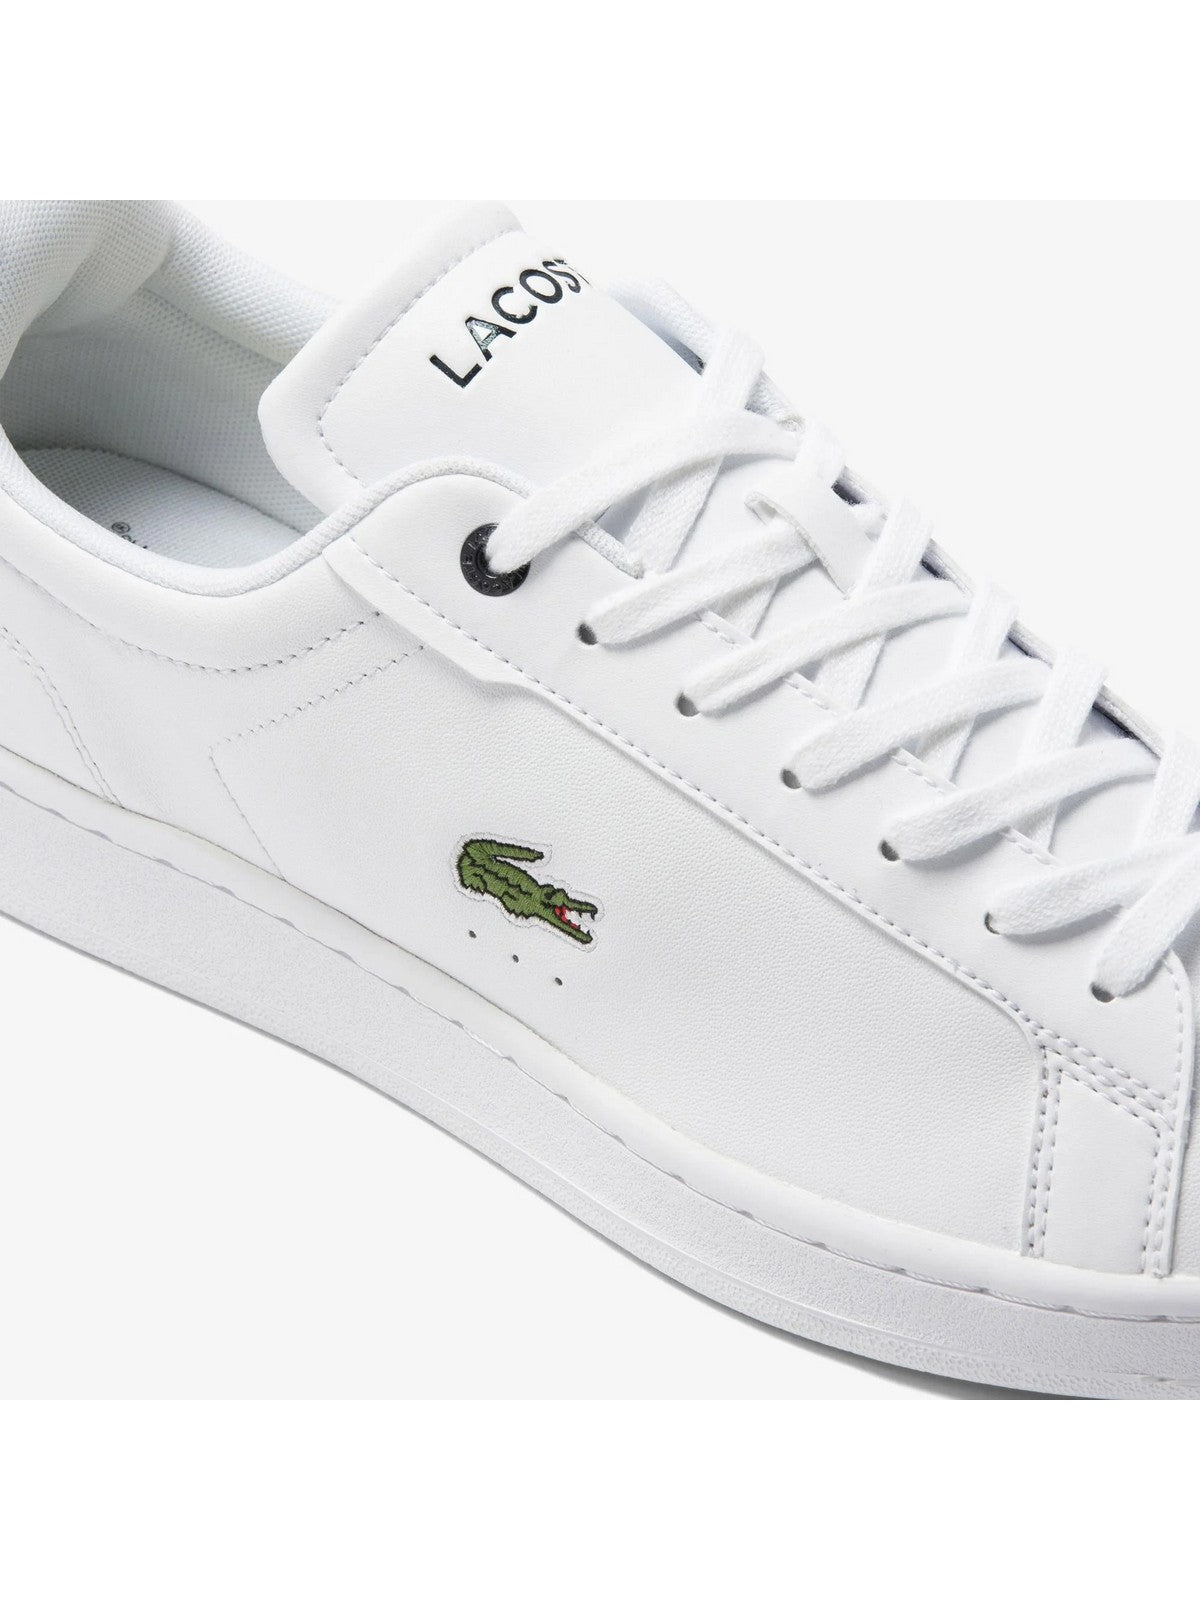 LACOSTE Homme Sneaker CARNABY PRO BL23 1 745SMA0110 042 Blanc